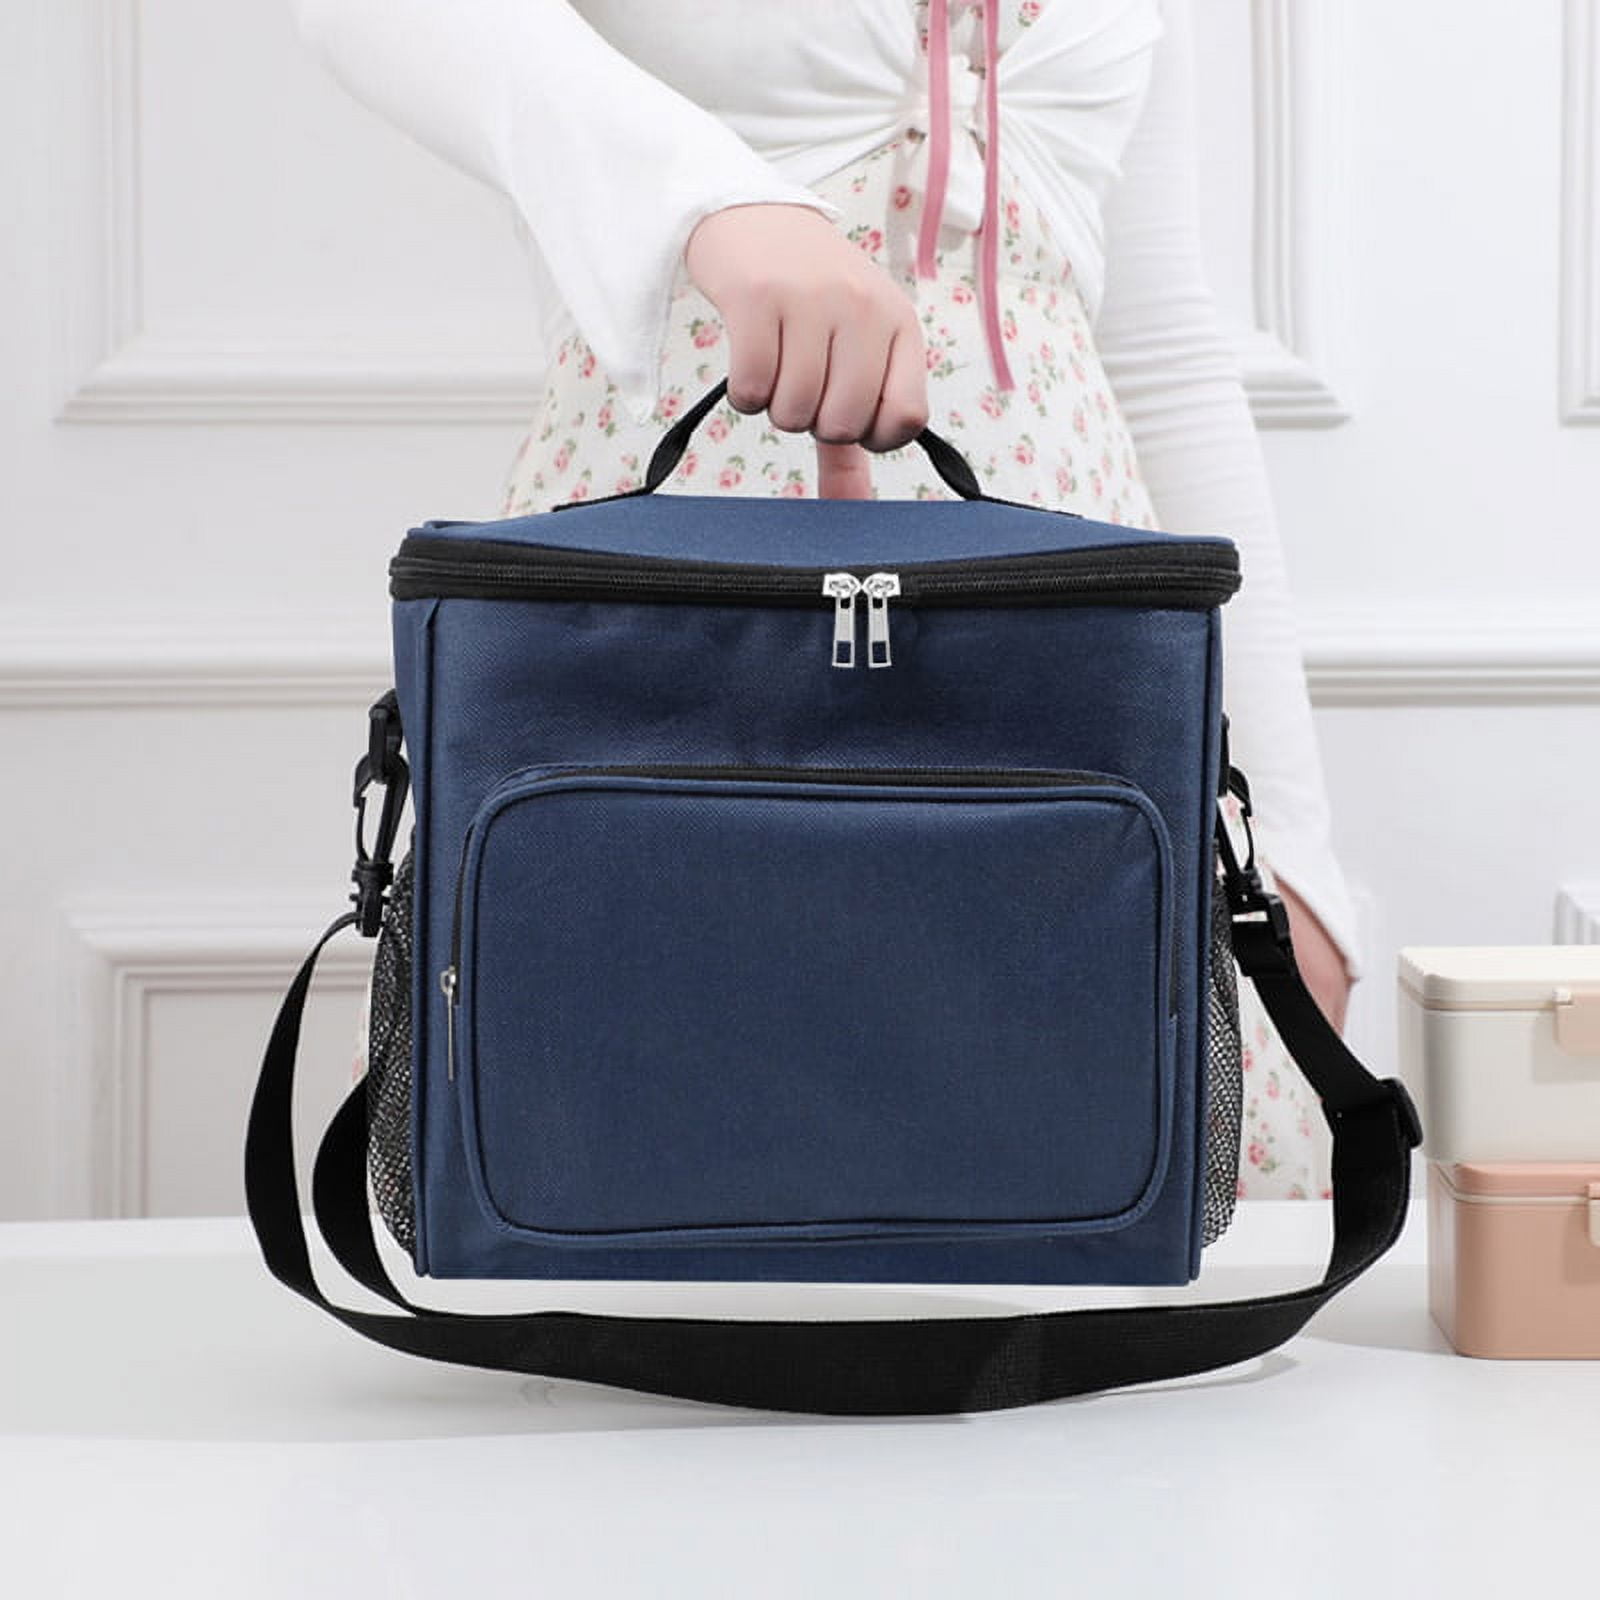 Marble Lunch Box for Women White Marble Stone Teens Girls Cooler Insulated  Lunch Bag Tote Freezable Shoulder Strap Waterproof Picnic Meal for School